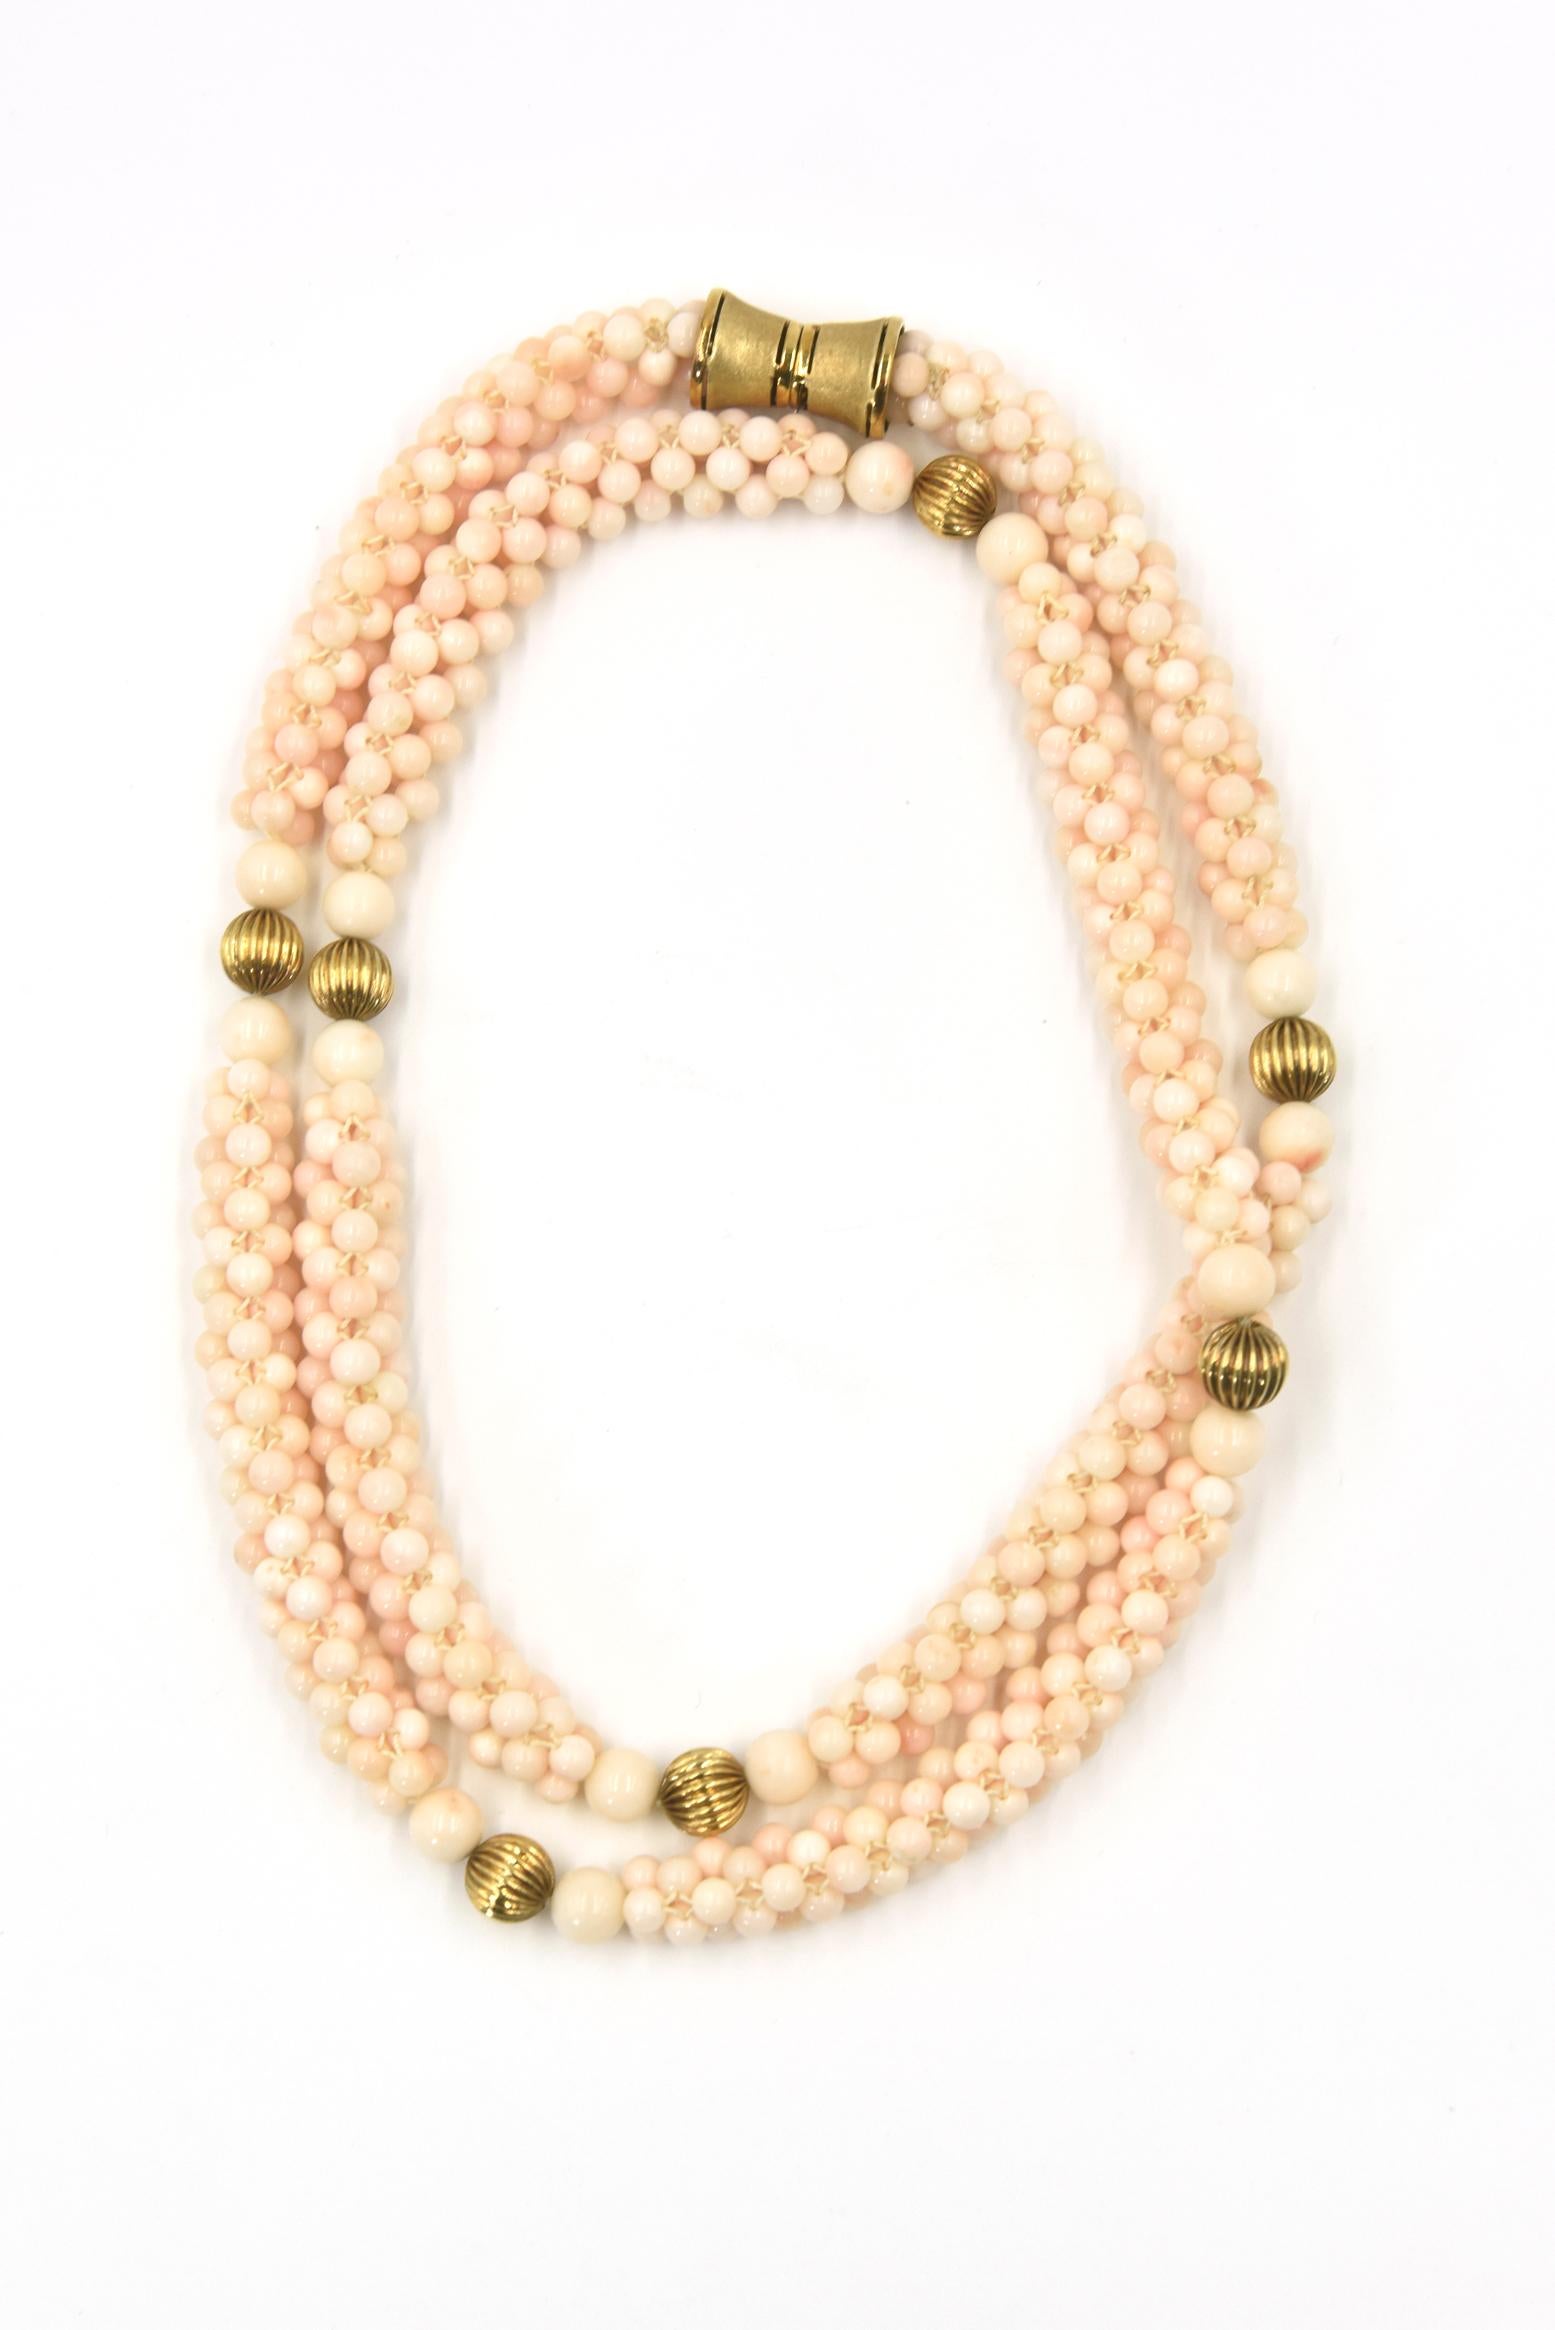 Woven Angel Skin Coral Gold Necklace and Bracelet In Good Condition For Sale In Miami Beach, FL